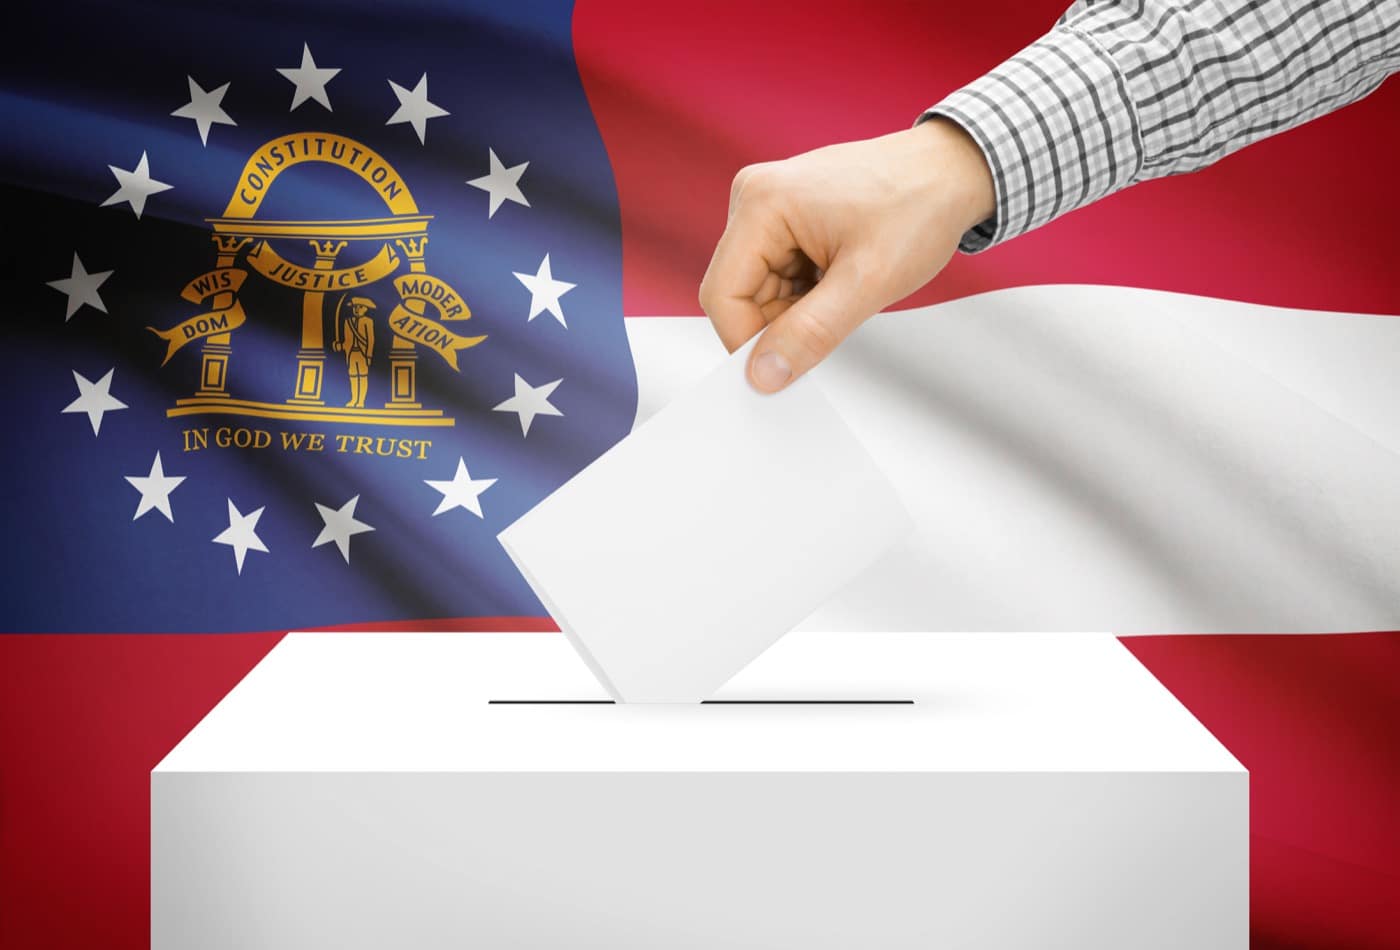 How to find sample ballots for the November 2022 election in Georgia